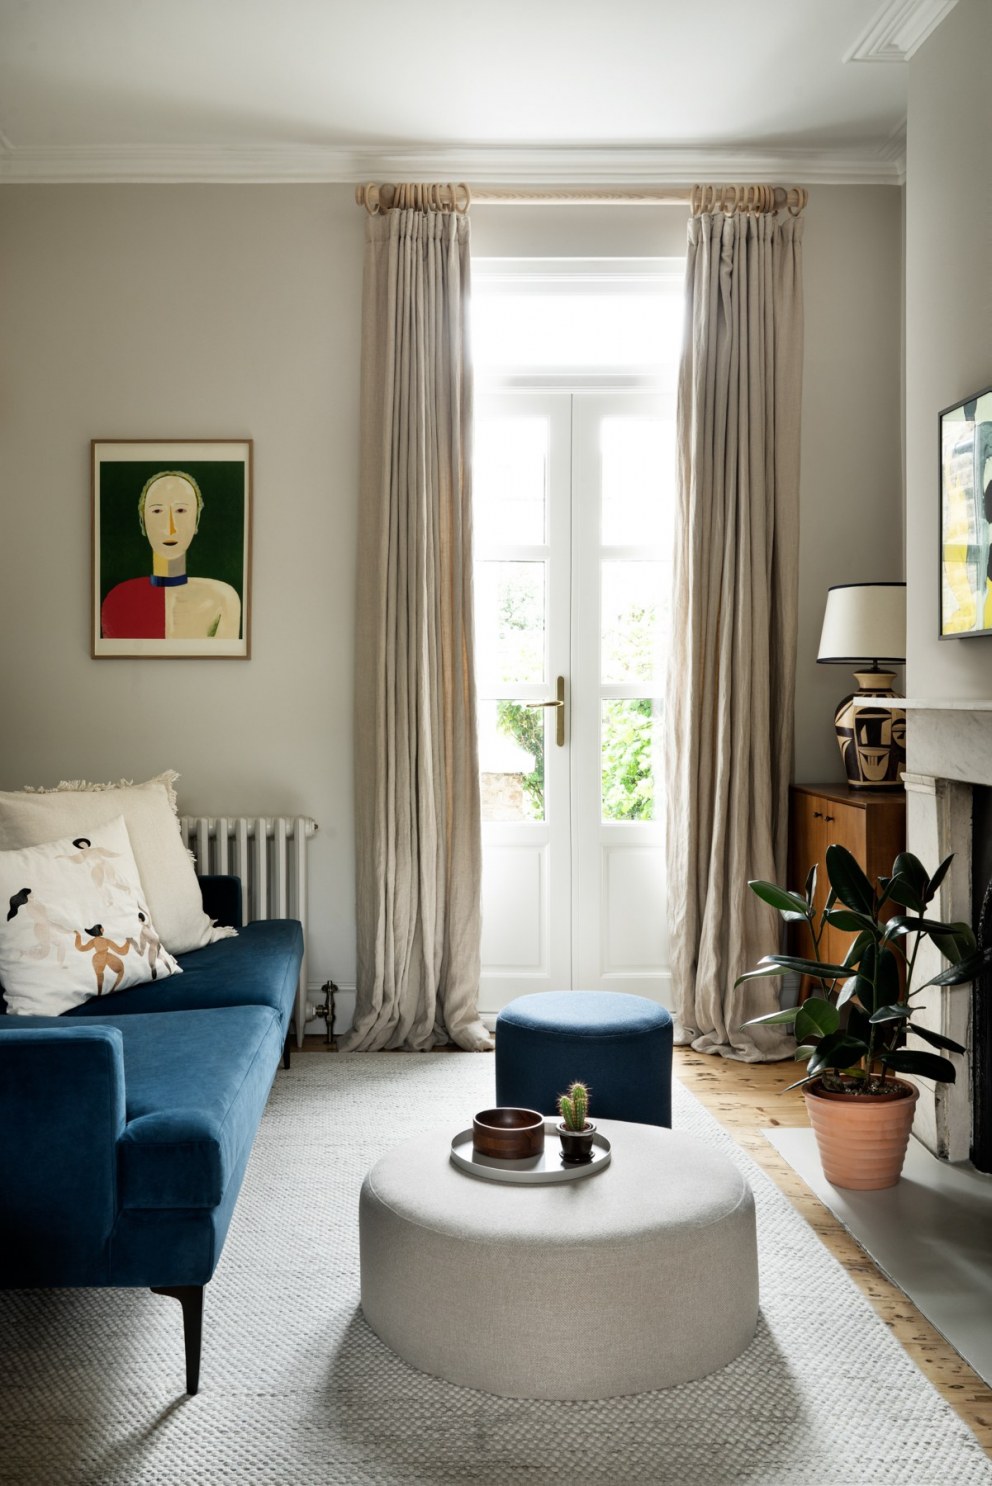 Peckham Home | Snug in a counterpoint colour to the bold living room | Interior Designers